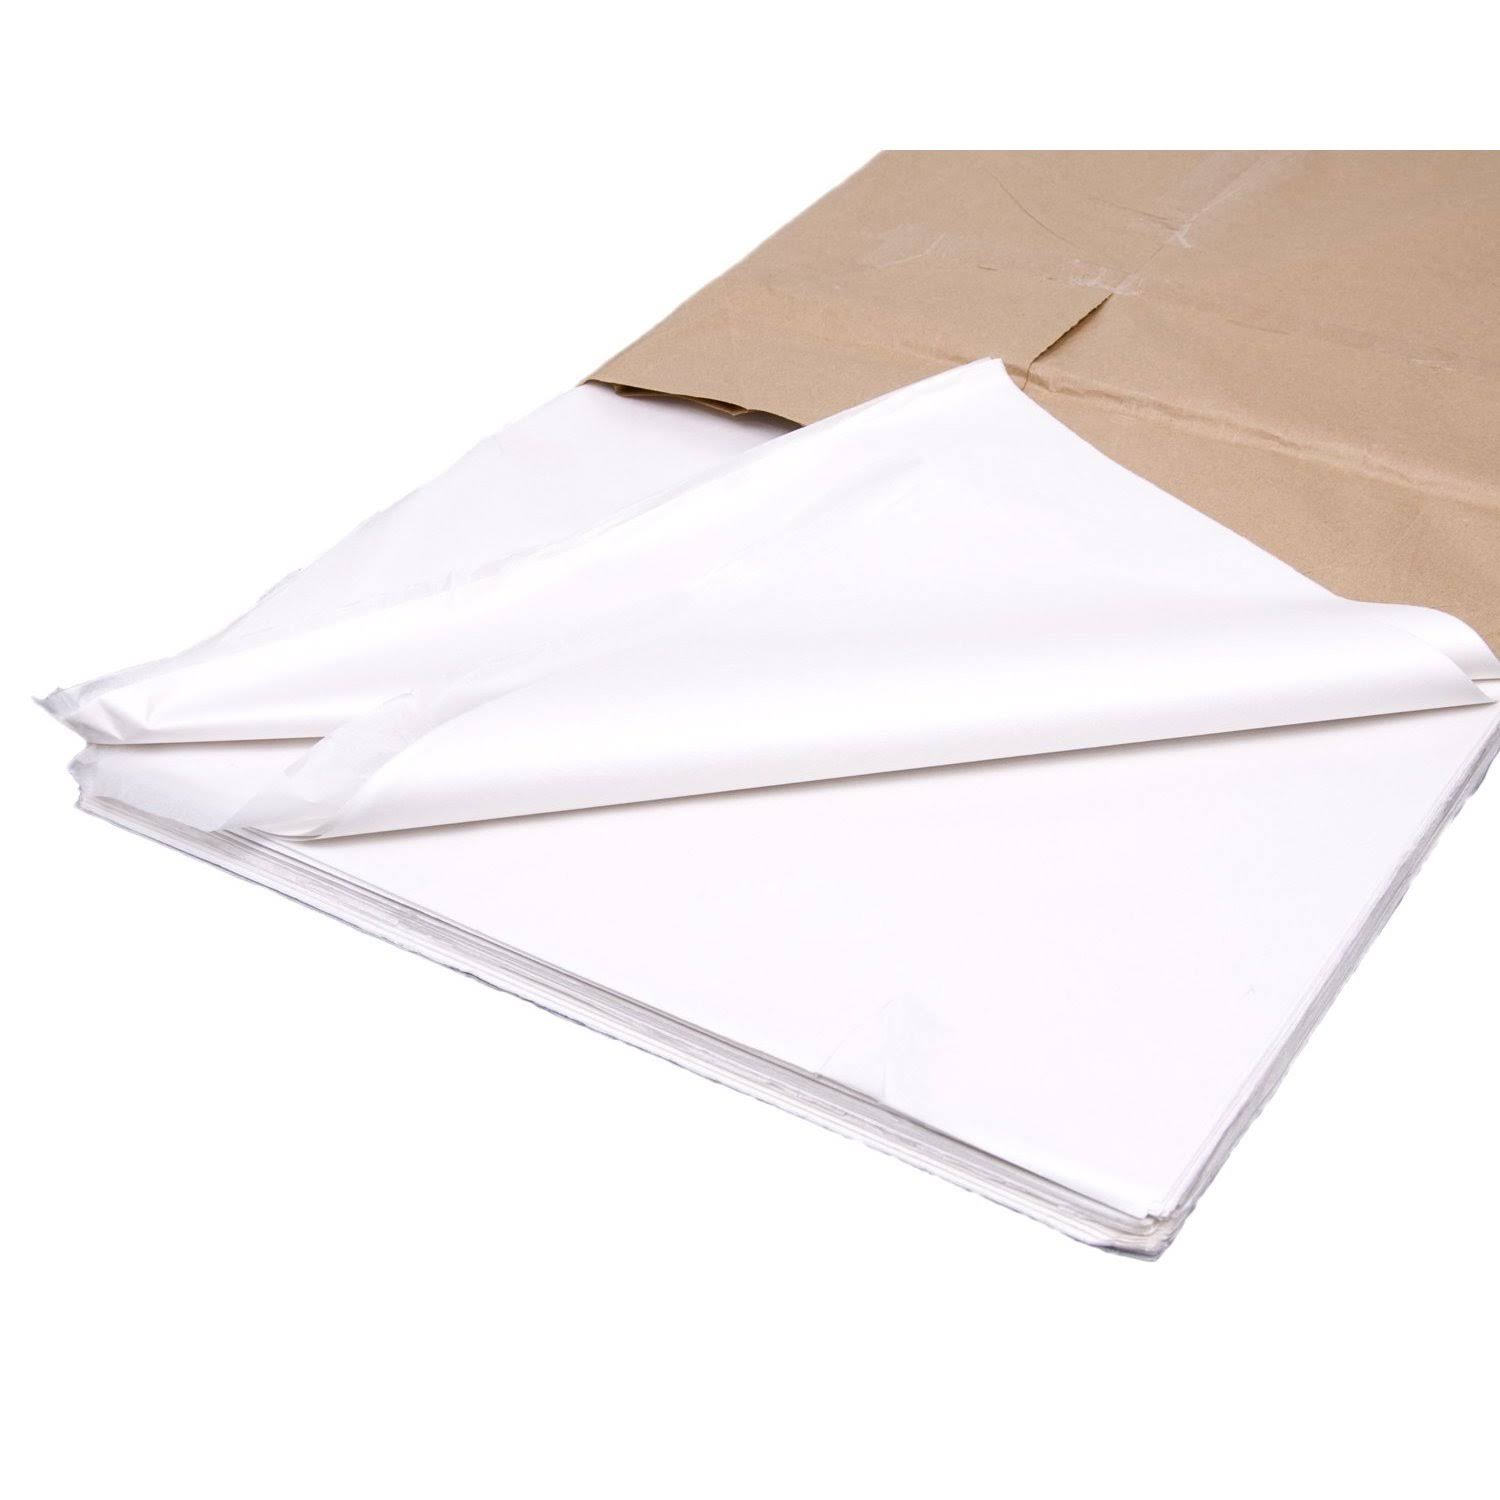 Tissue Paper Acid Free 10 Sheets | Monster Parties | Arts & Crafts | Best Price Guarantee | Free Shipping On All Orders | 30 Day Money Back Guaran